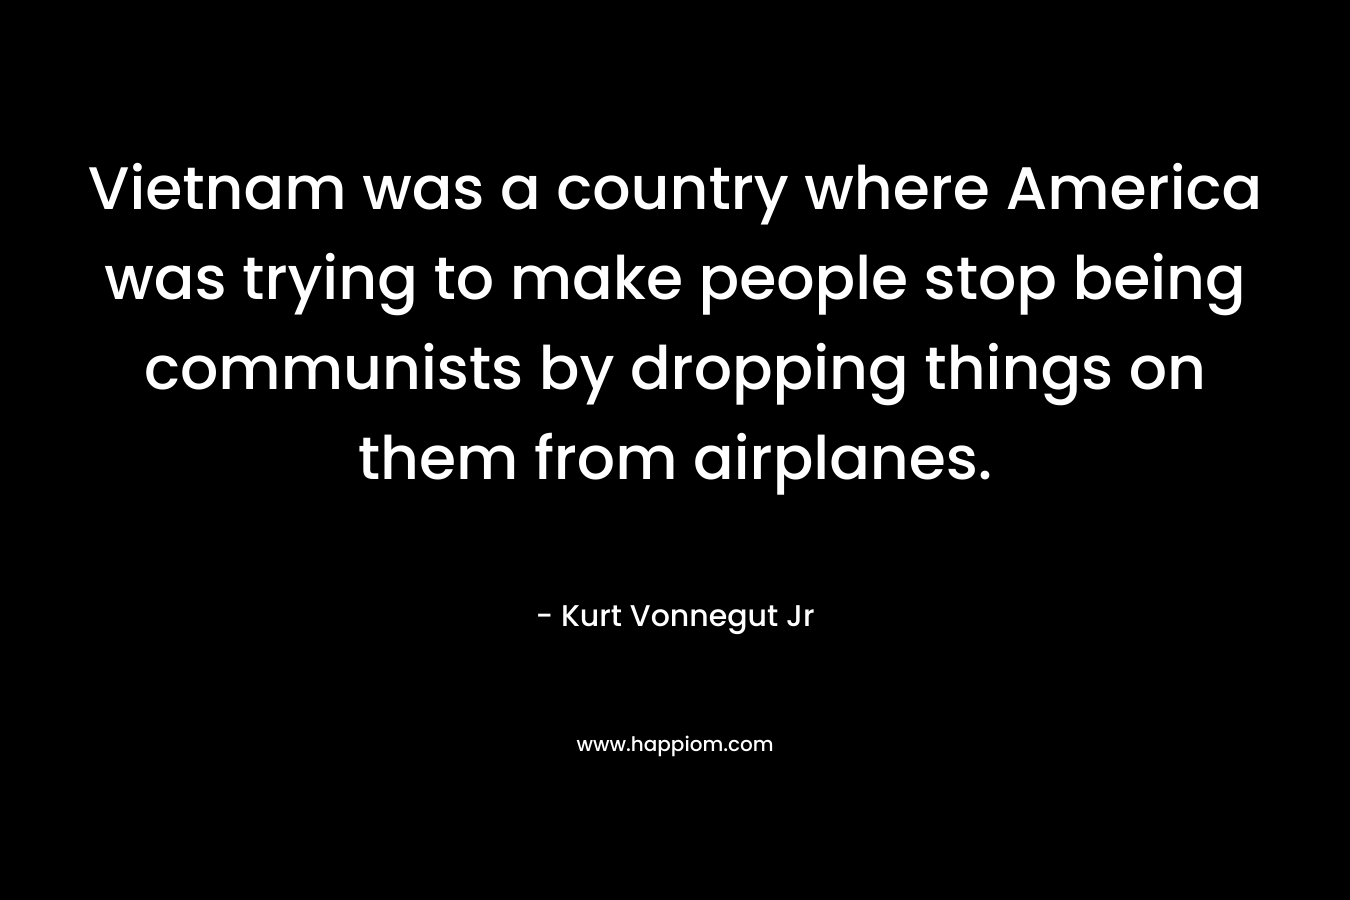 Vietnam was a country where America was trying to make people stop being communists by dropping things on them from airplanes.